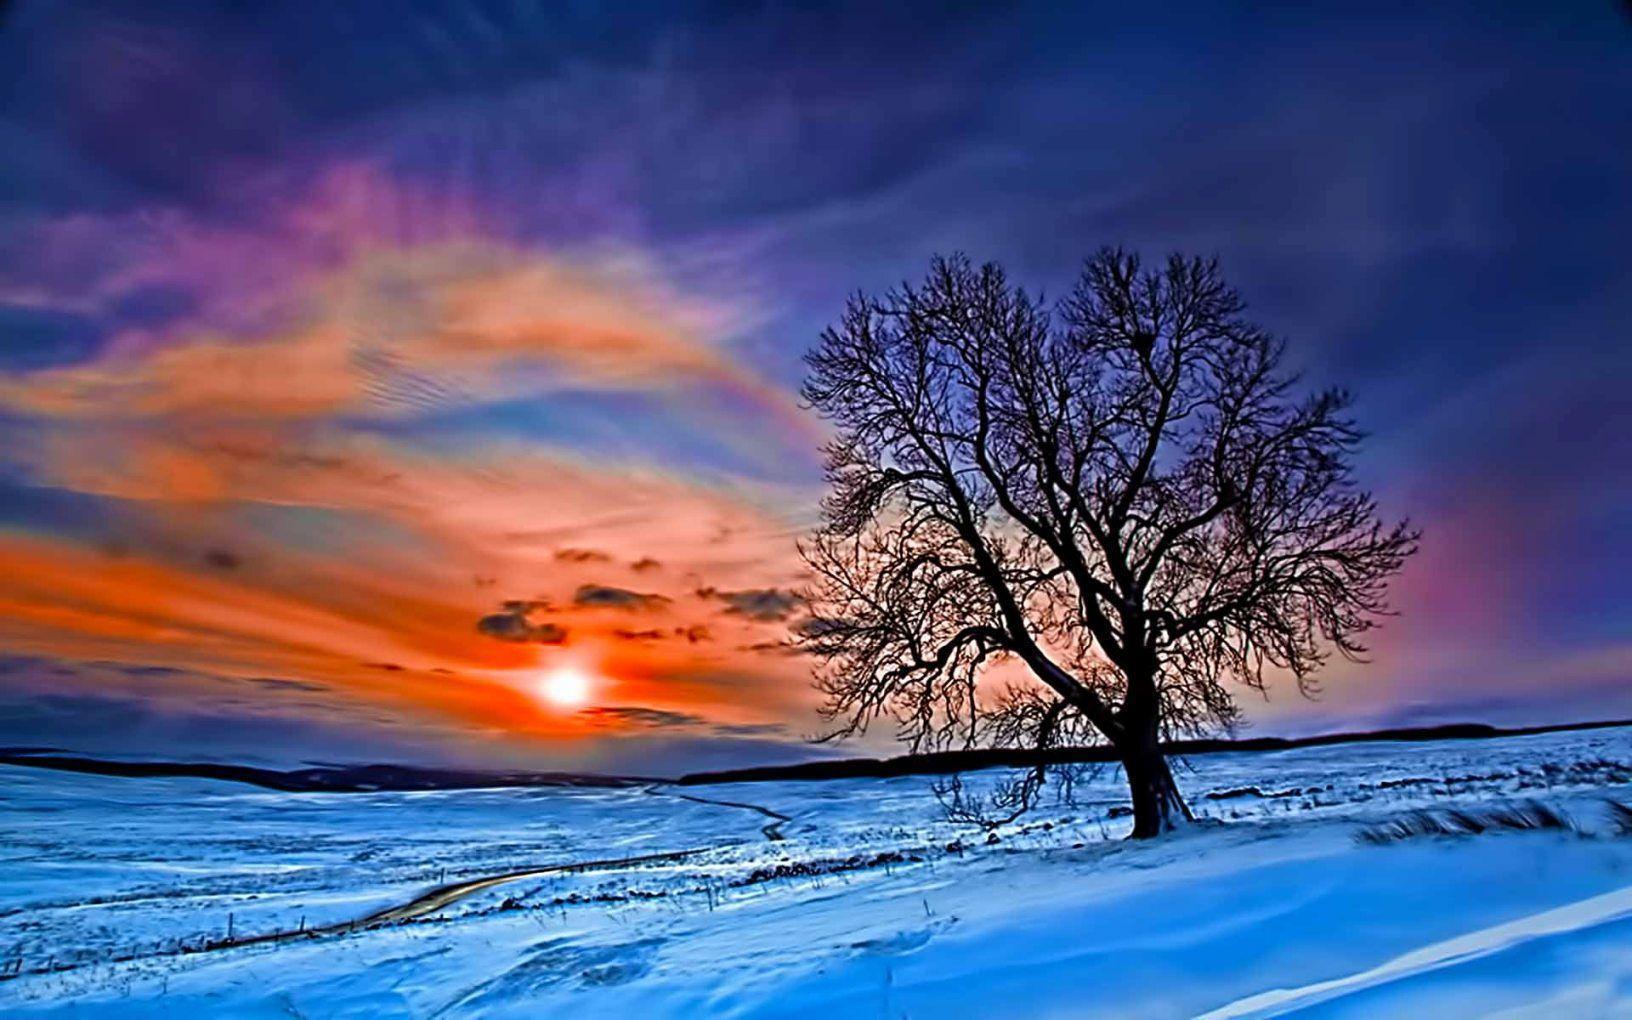 Winter Nature Backgrounds - Wallpaper Cave
